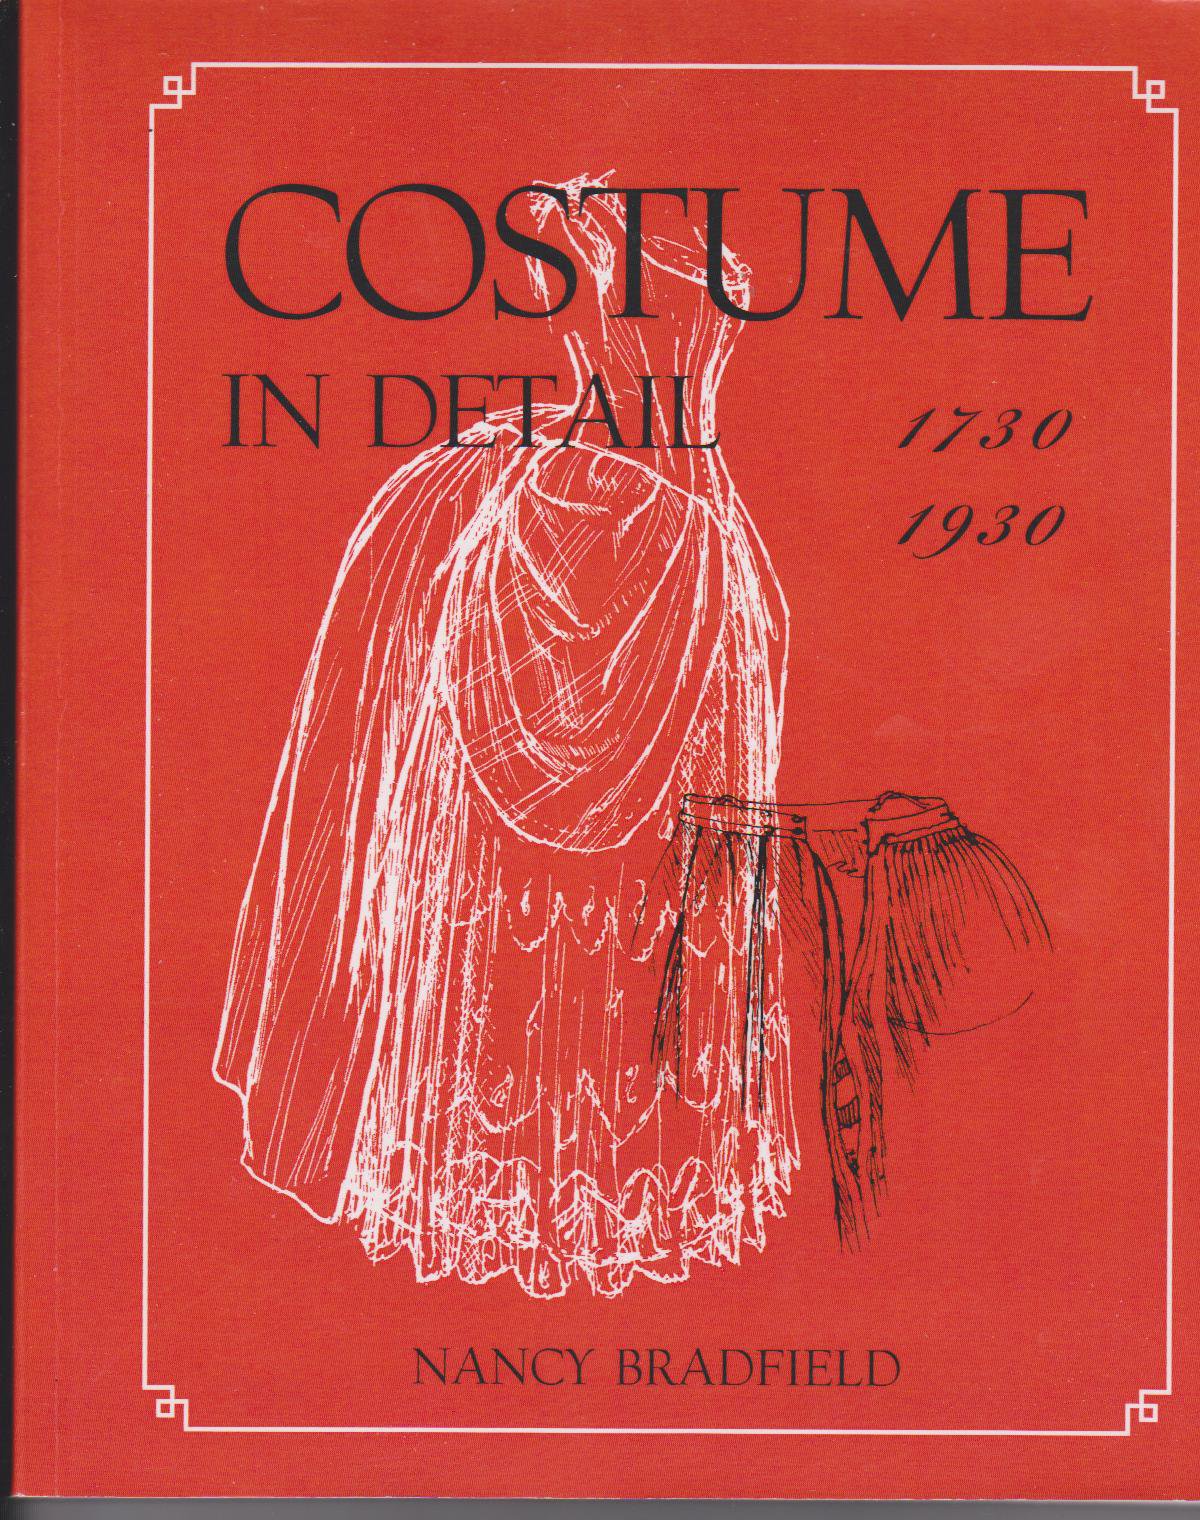 Costume in Detail - N.Bradfield - The History of Fashion - sketches of garments in musuems - Georgian Costume - 1700's - Open Robes - Closed Robes - HandBound Costumes Bibliography